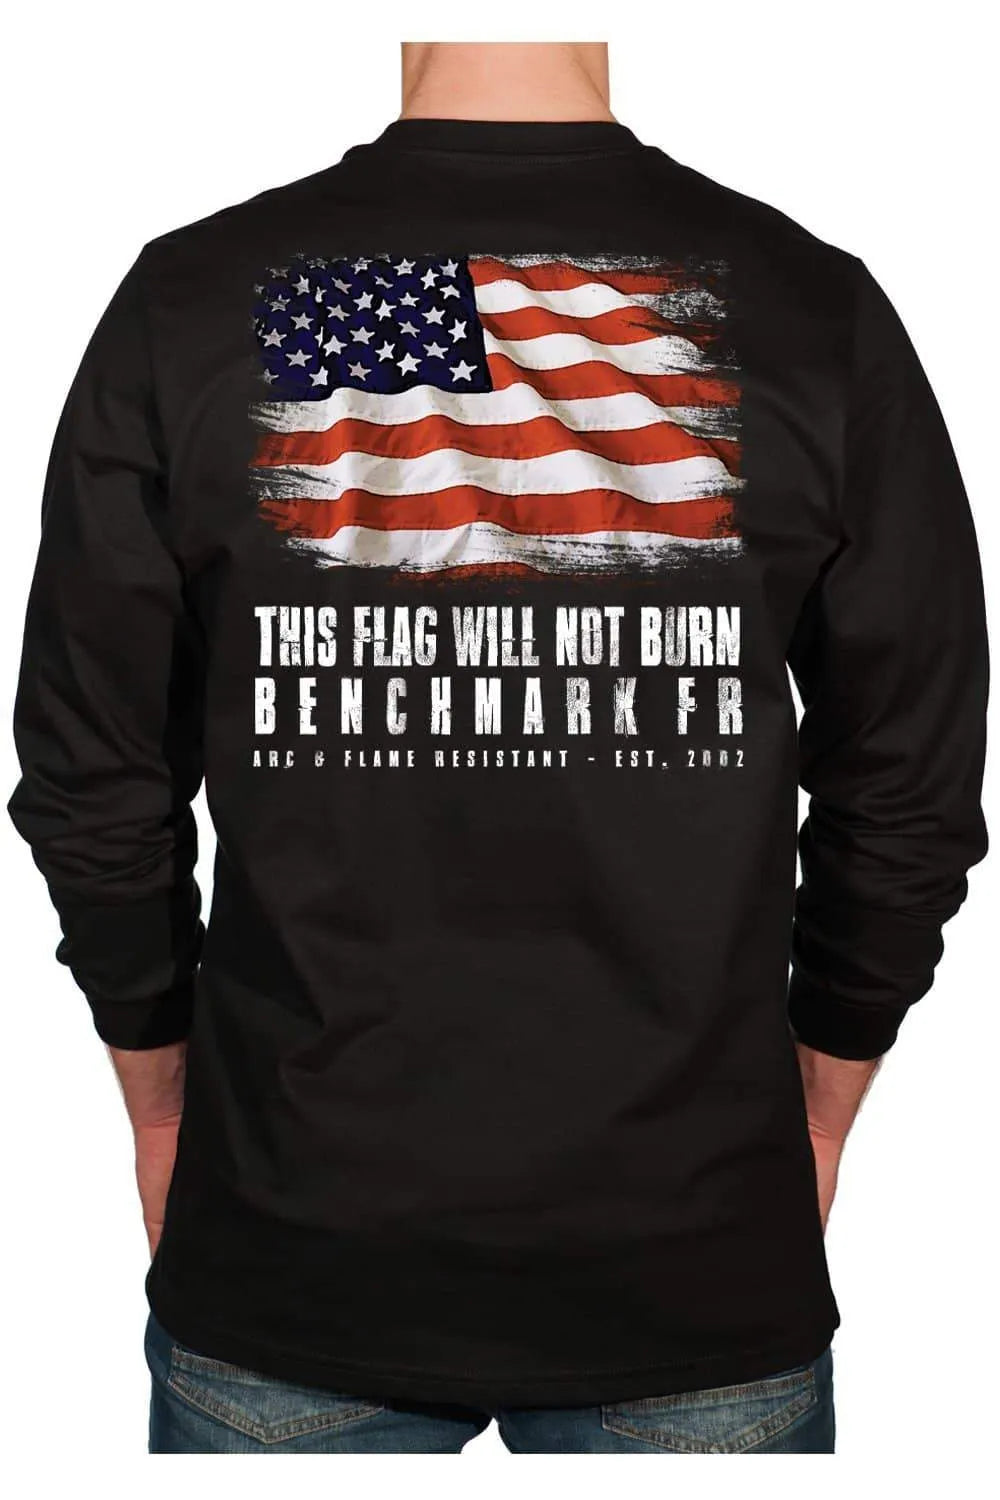 This Flag Will Not Burn Long Sleeved Flame Resistant T-Shirt BenchMark FR